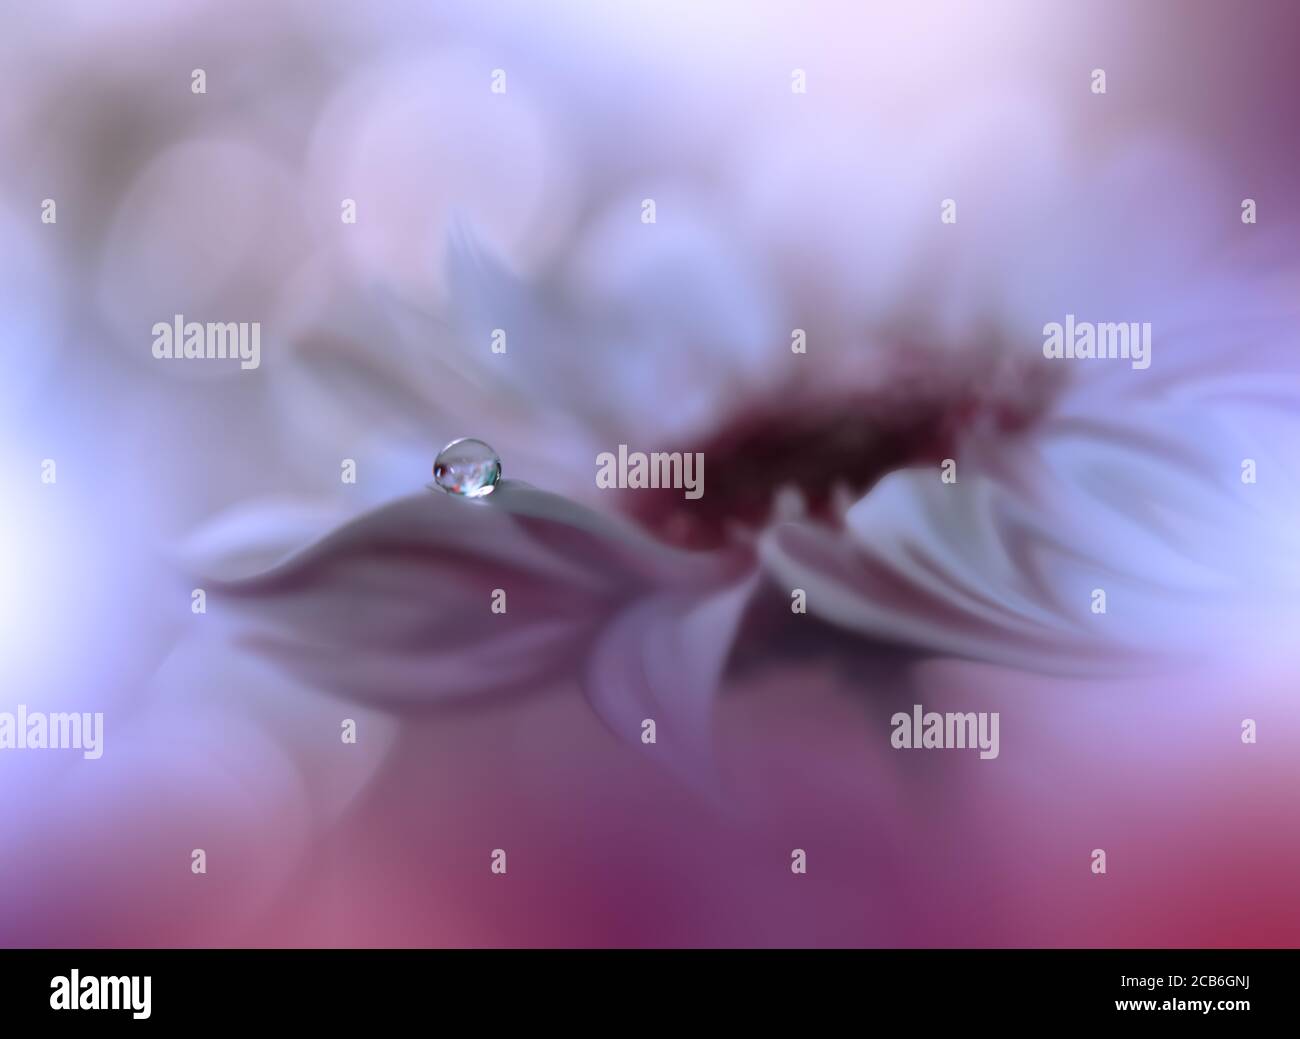 Beautiful Nature Background.Floral Art Design.Abstract Macro Photography.Gerbera Daisy Flower.Pastel Flowers.Violet Background.Creative Artistic Drop. Stock Photo